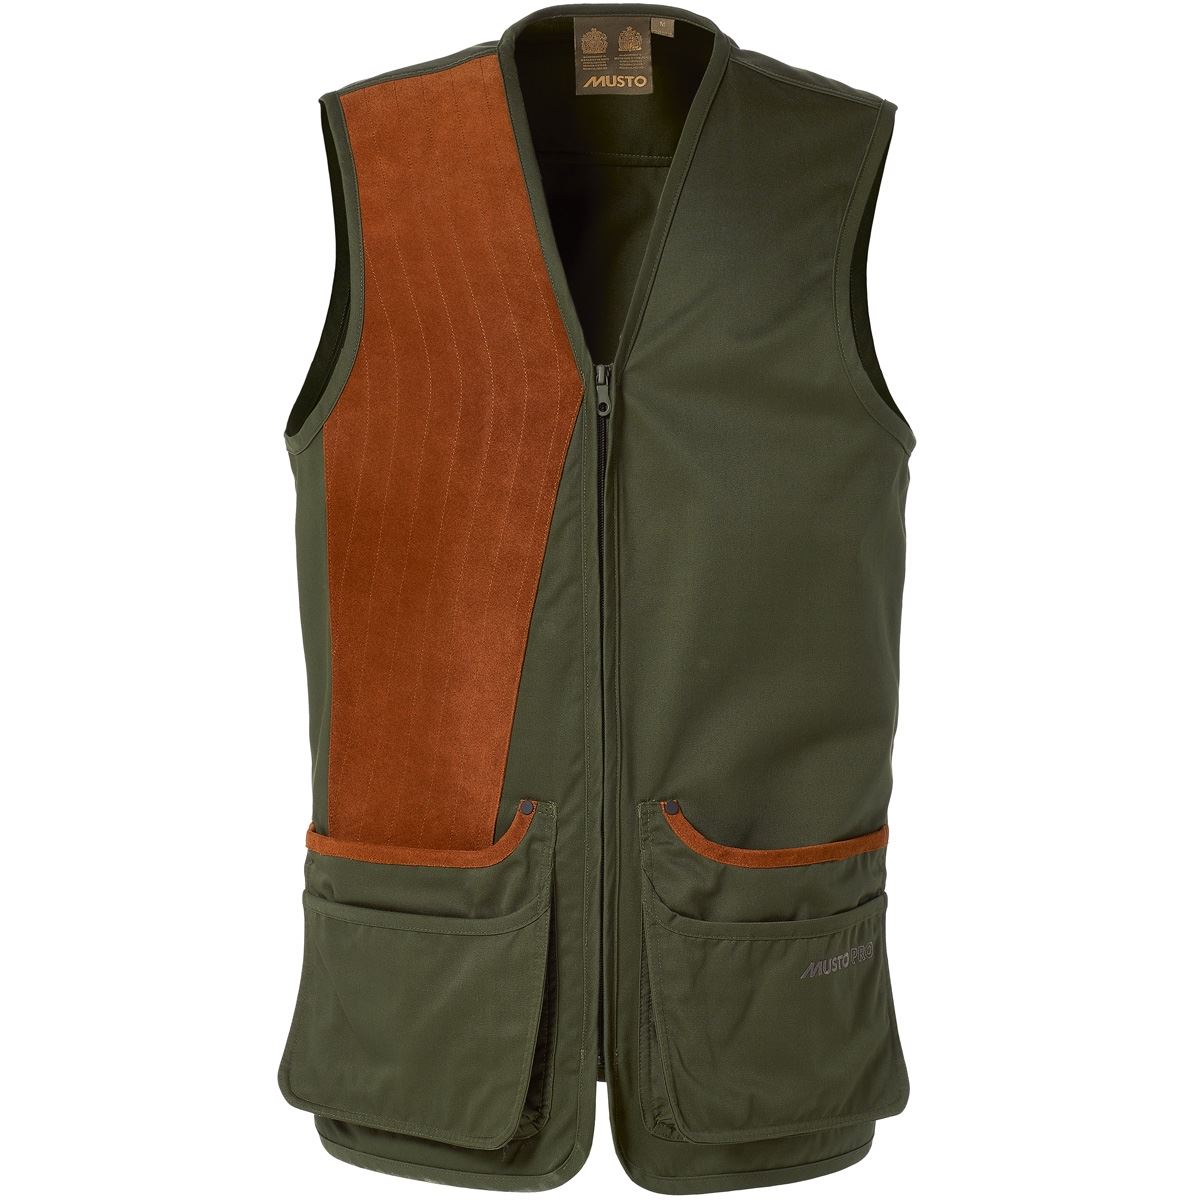 What is the material of the Musto shooting vest for clay shooting?